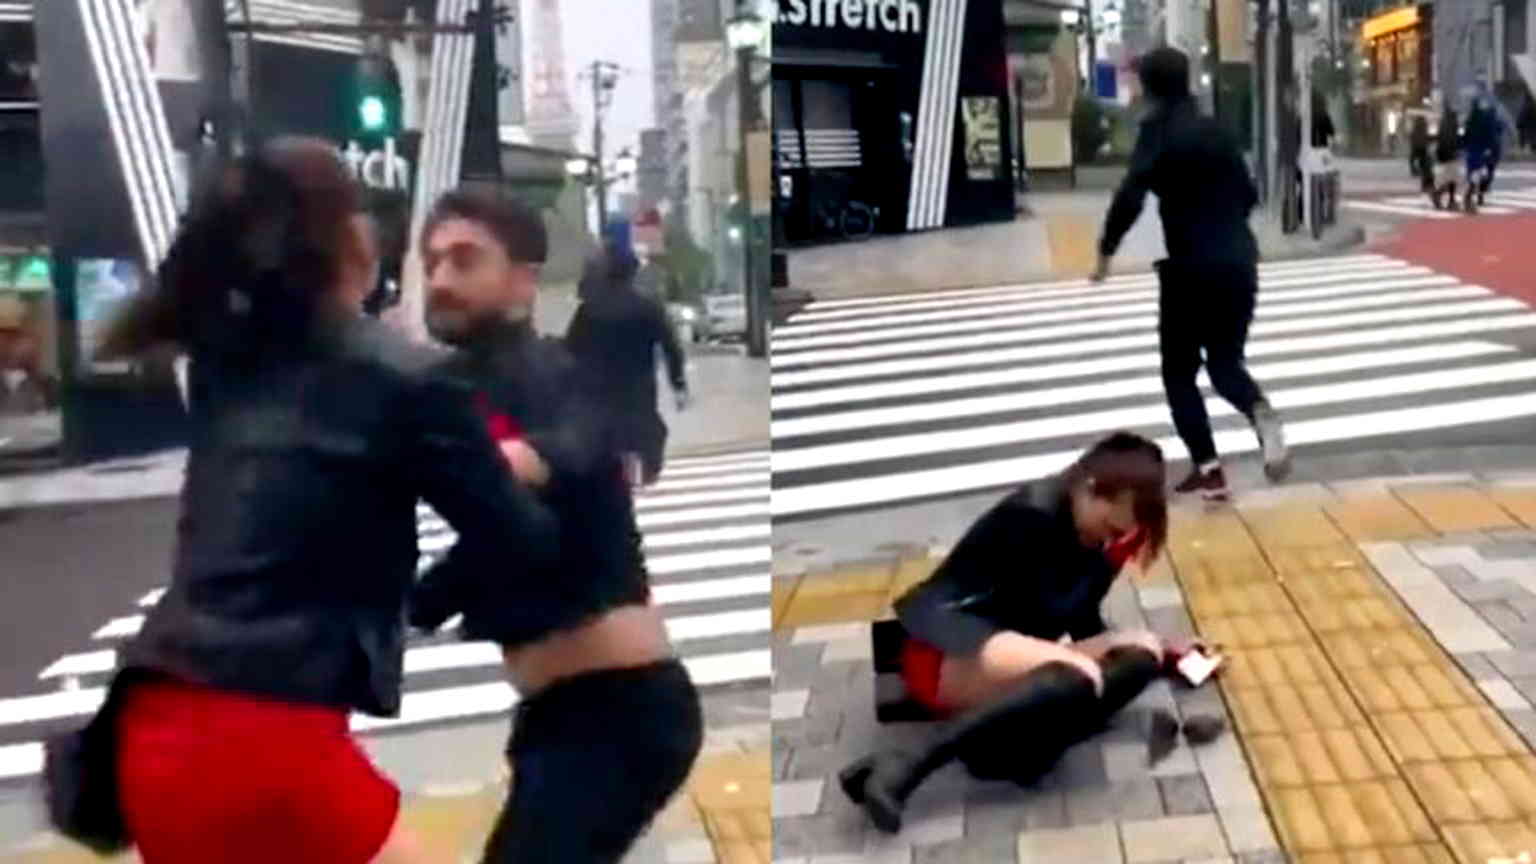 French tourist in Japan arrested for punching woman in the face